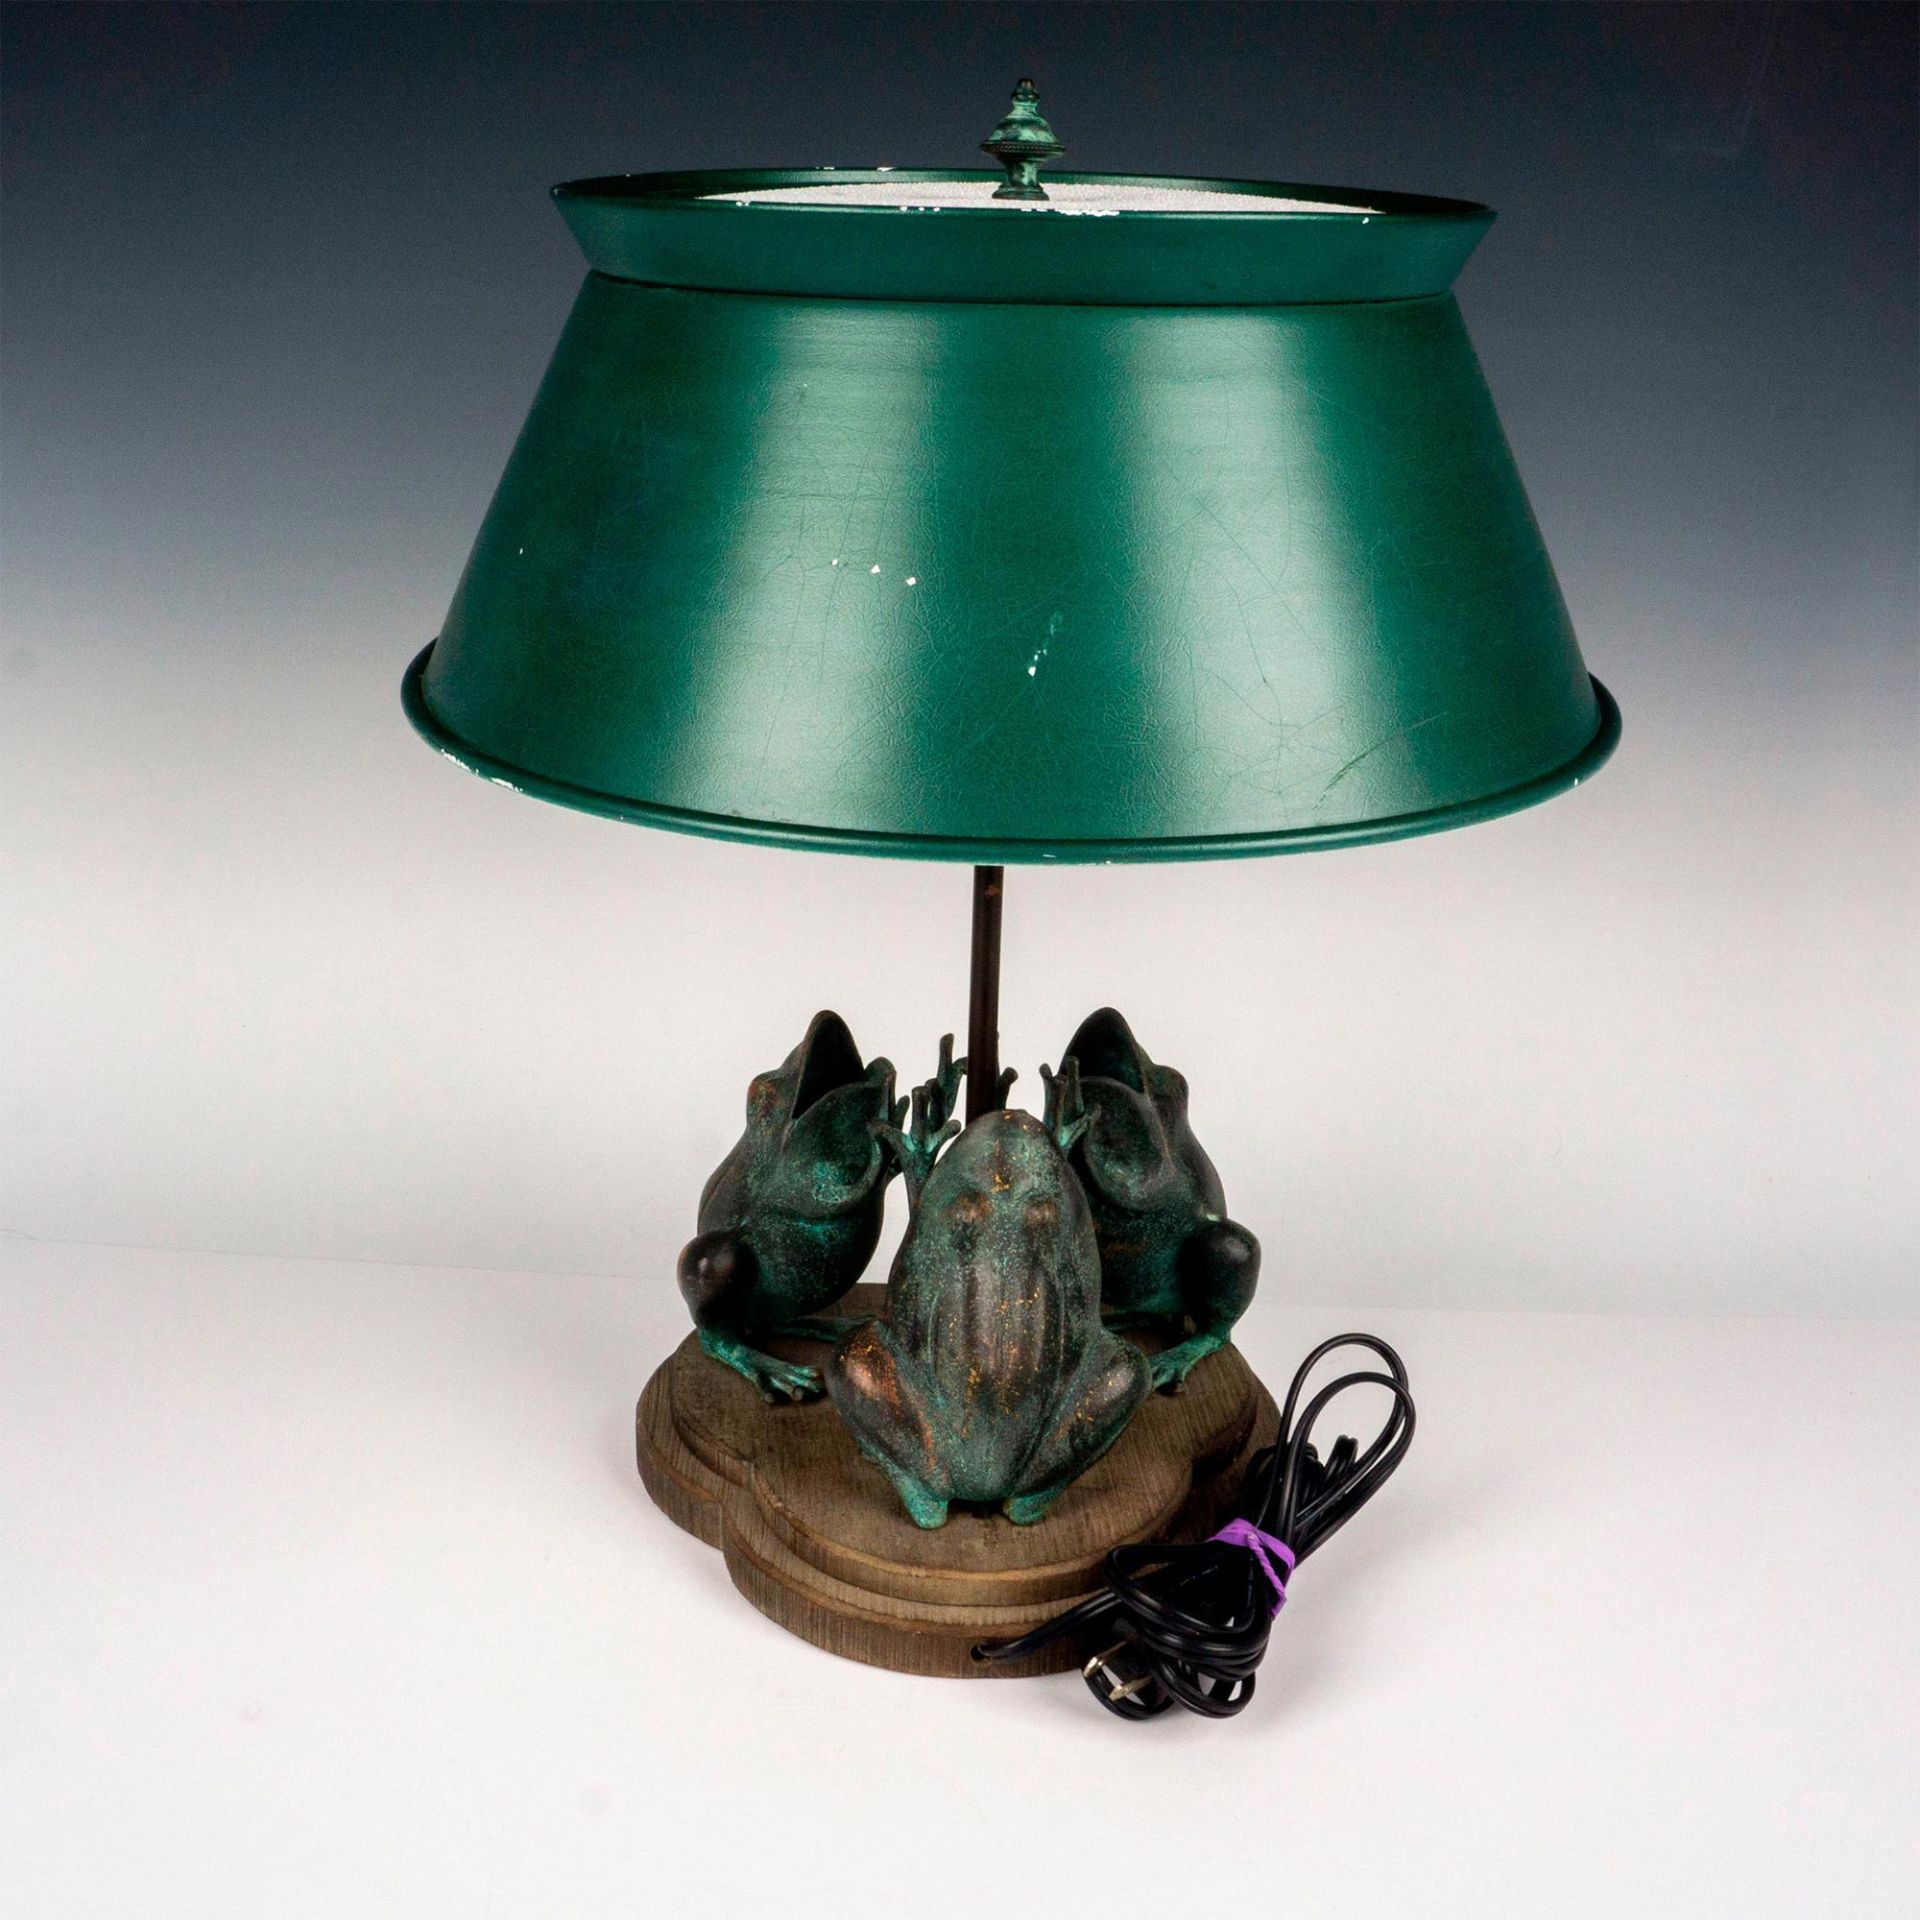 Frederick Cooper Wood and Metal Modern Frog Table Lamp - Image 2 of 5